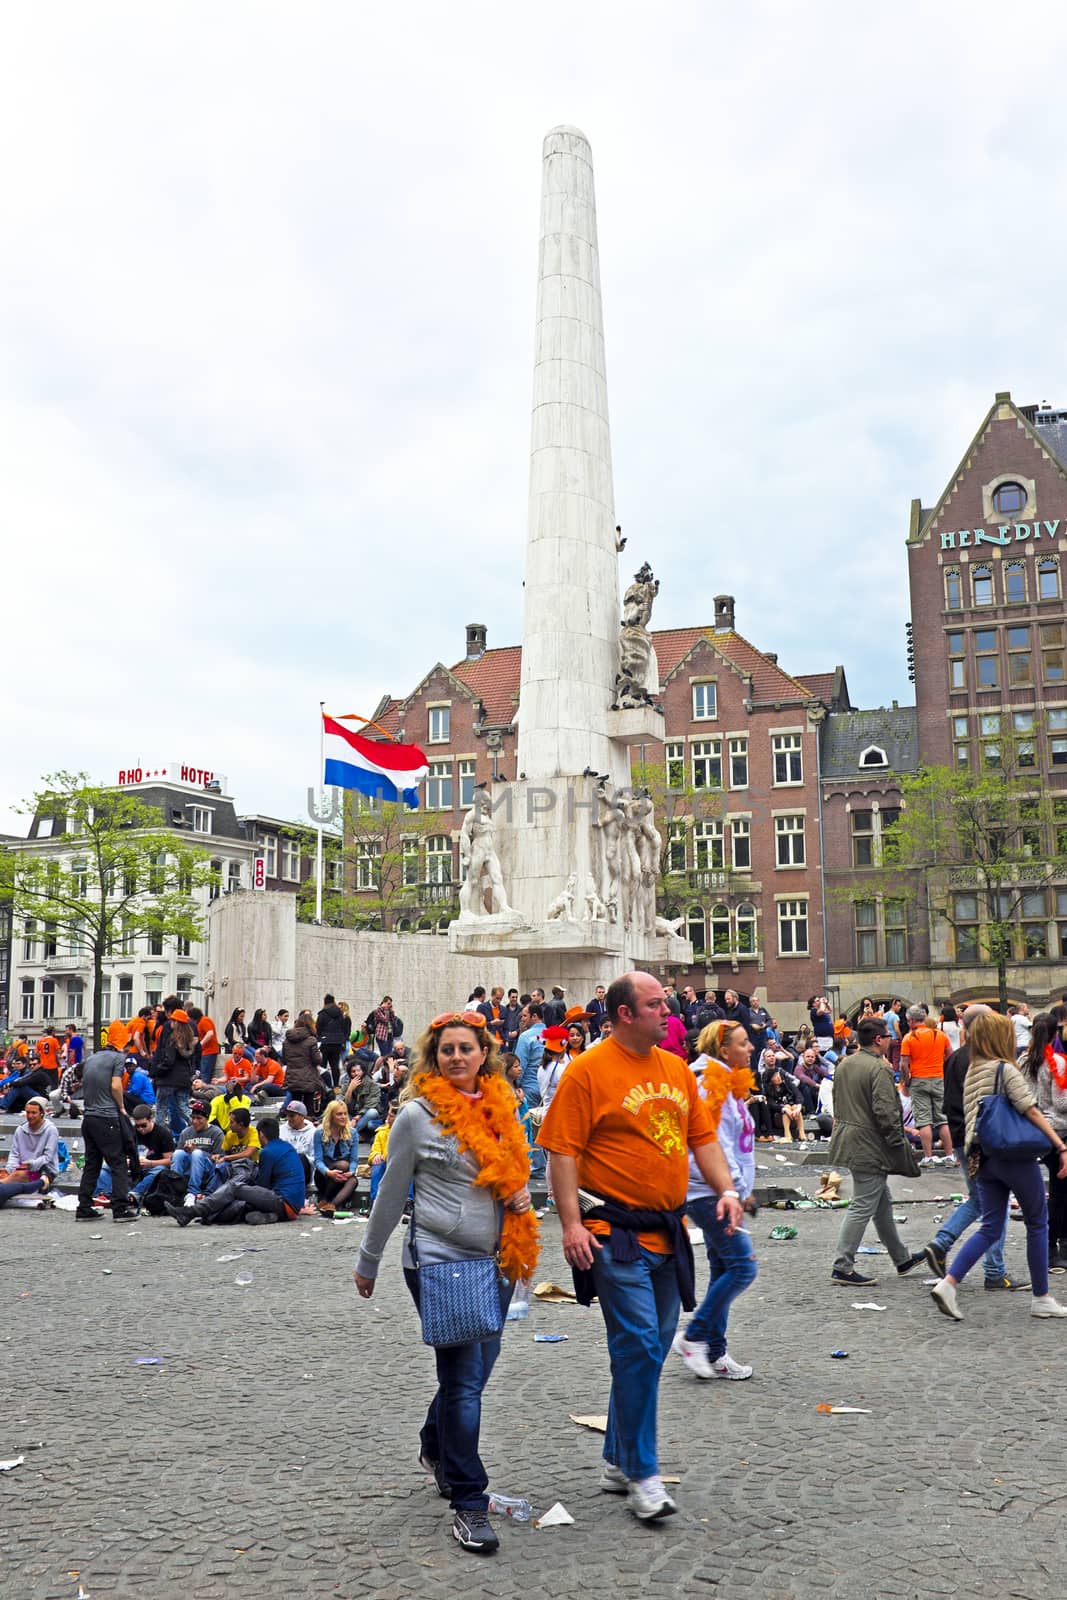 AMSTERDAM - APRIL 26: On the Dam square people in orange celebrating kings day on April 26, 2014 in Amsterdam, The Netherlands